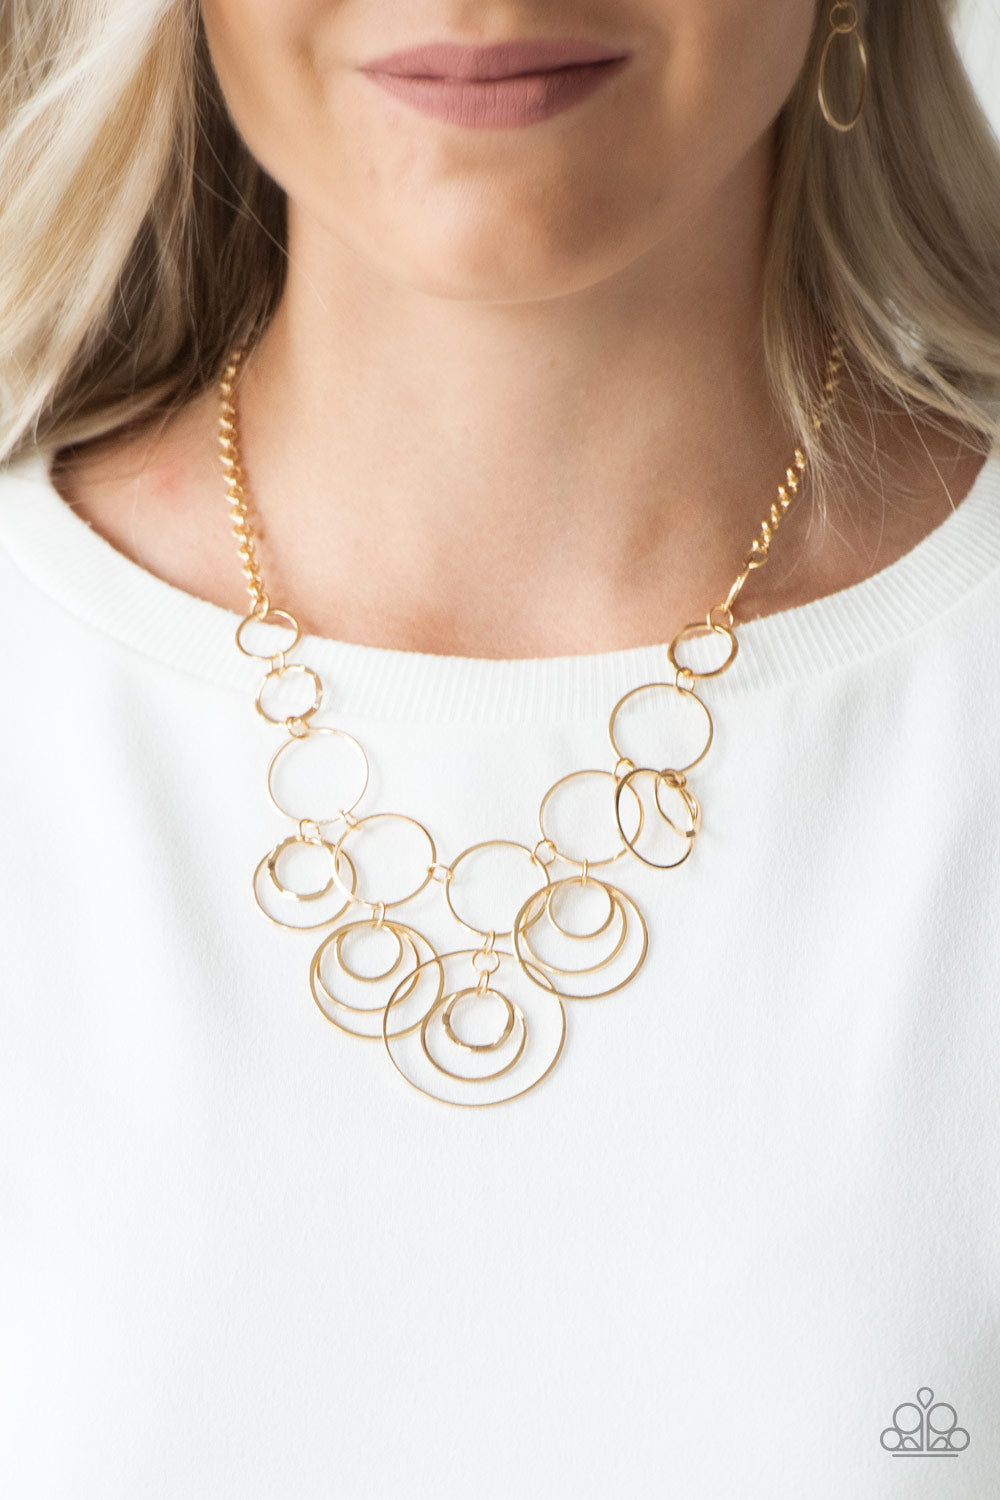 Break The Cycle Gold Necklace - Paparazzi Accessories.  Featuring smooth and delicately hammered finishes, mismatched gold hoops connect below the collar for a bold industrial look. Features an adjustable clasp closure.  All Paparazzi Accessories are lead free and nickel free!  Sold as one individual necklace. Includes one pair of matching earrings.